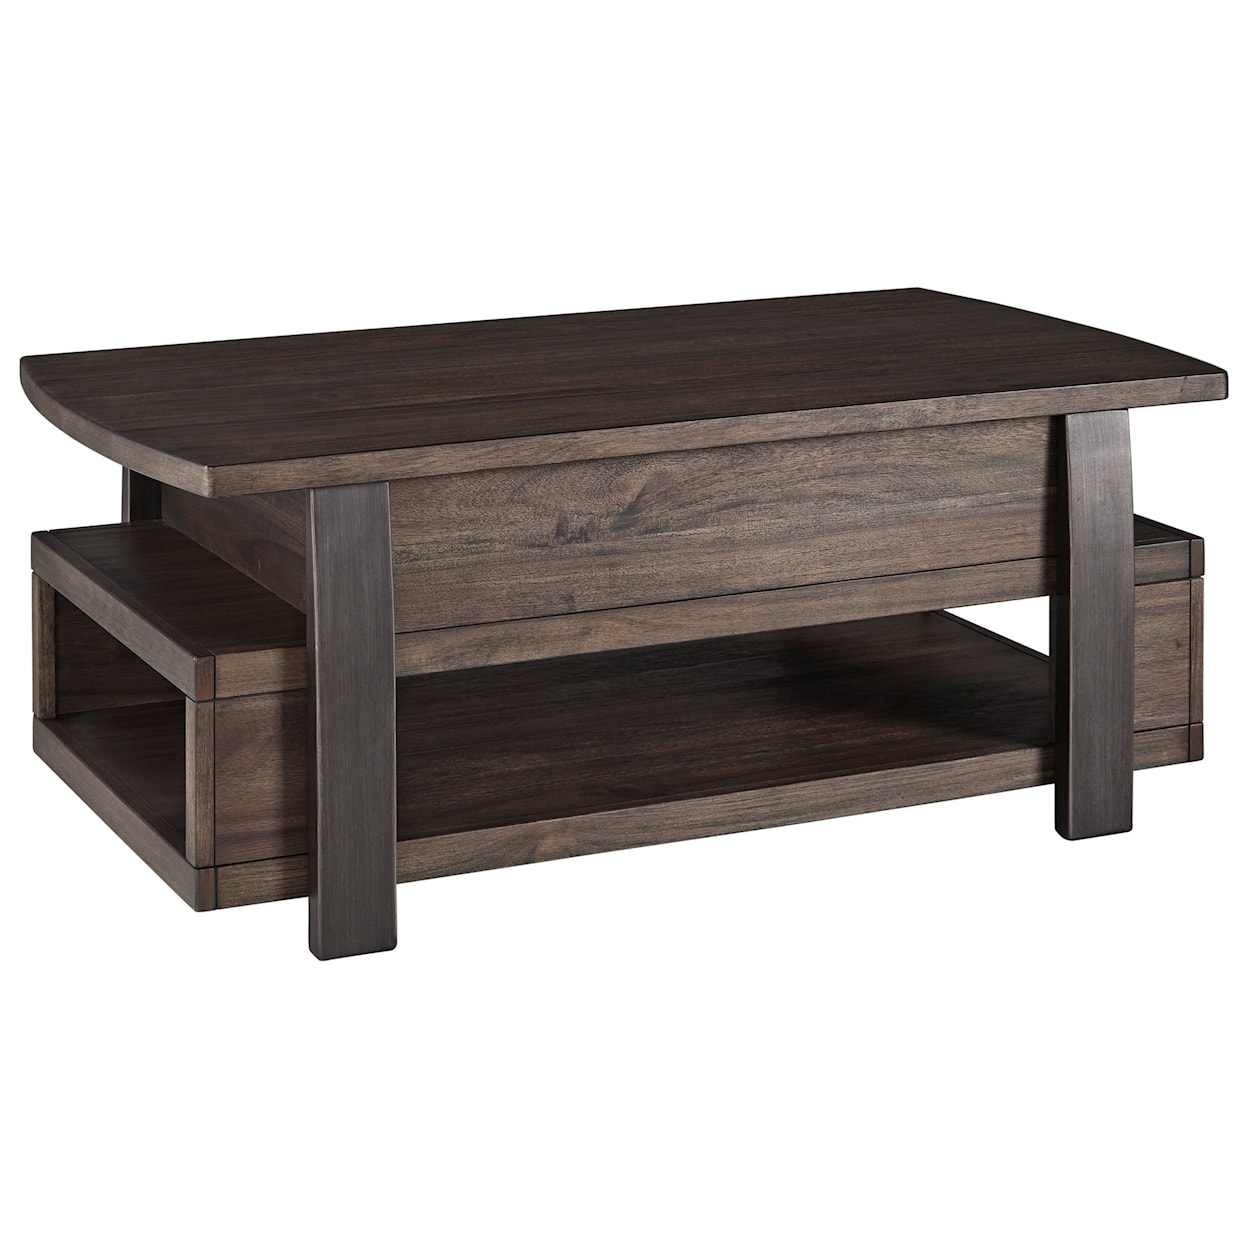 Ashley Furniture Signature Design Vailbry Lift Top Cocktail Table